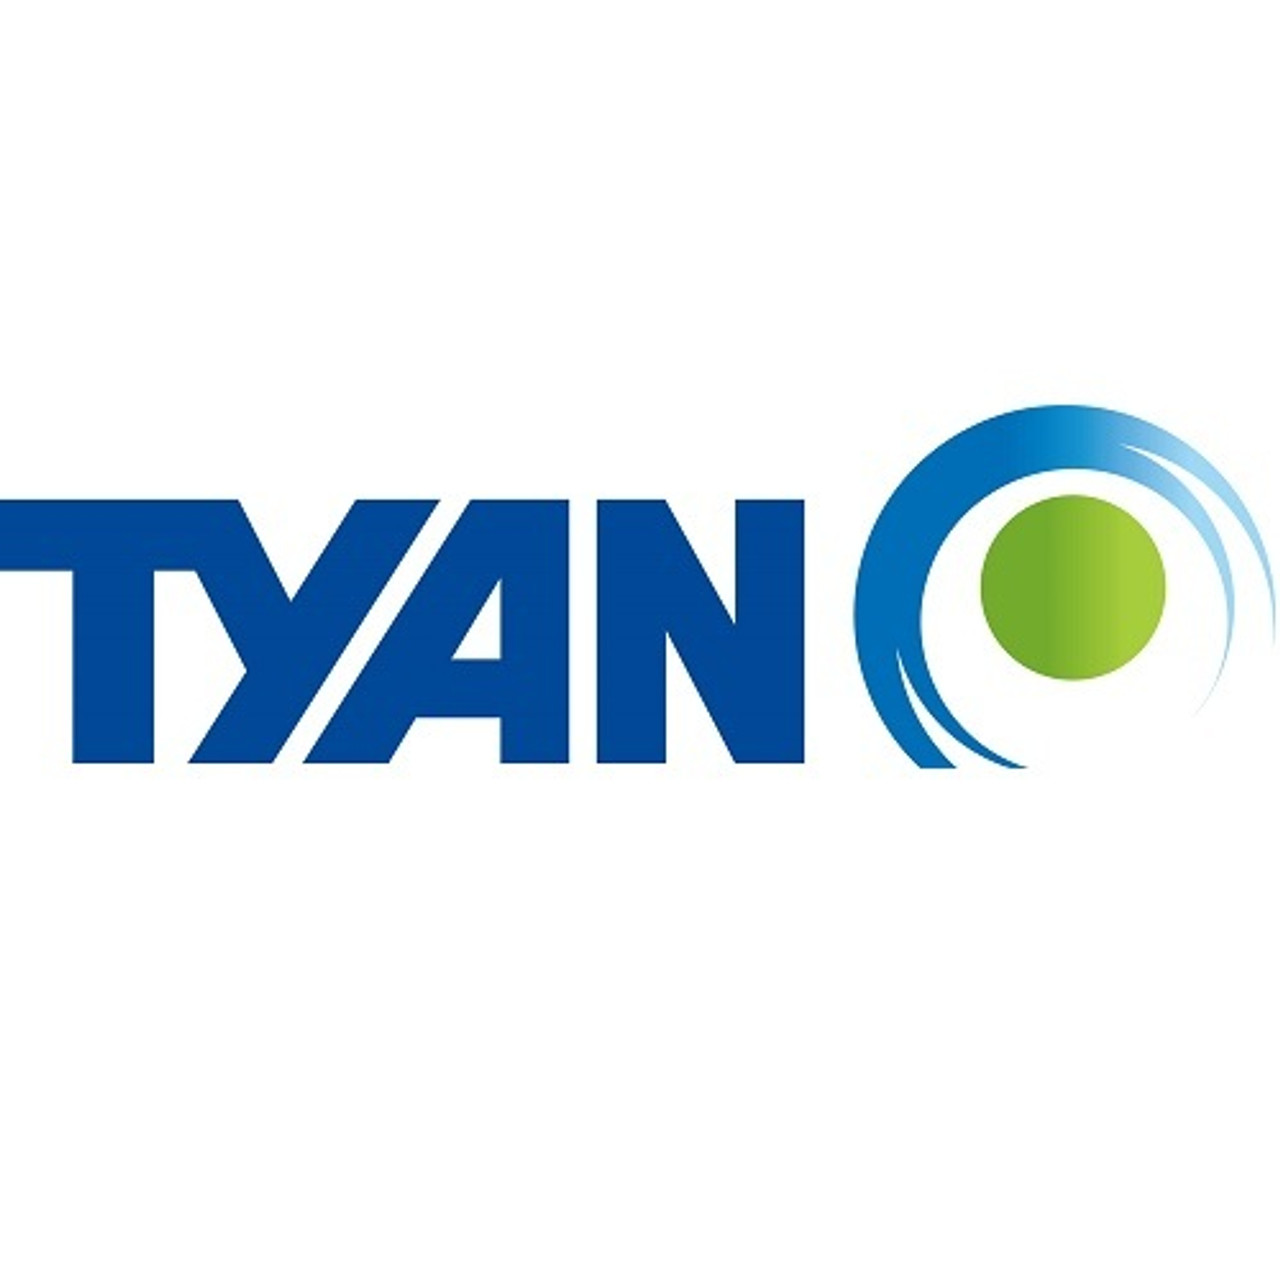 Tyan 4U server that supports up to 8 GPU cards, dual Xeon 5600/5500 CPUs, four 2.5 HDDs, and redundant cooling fans.